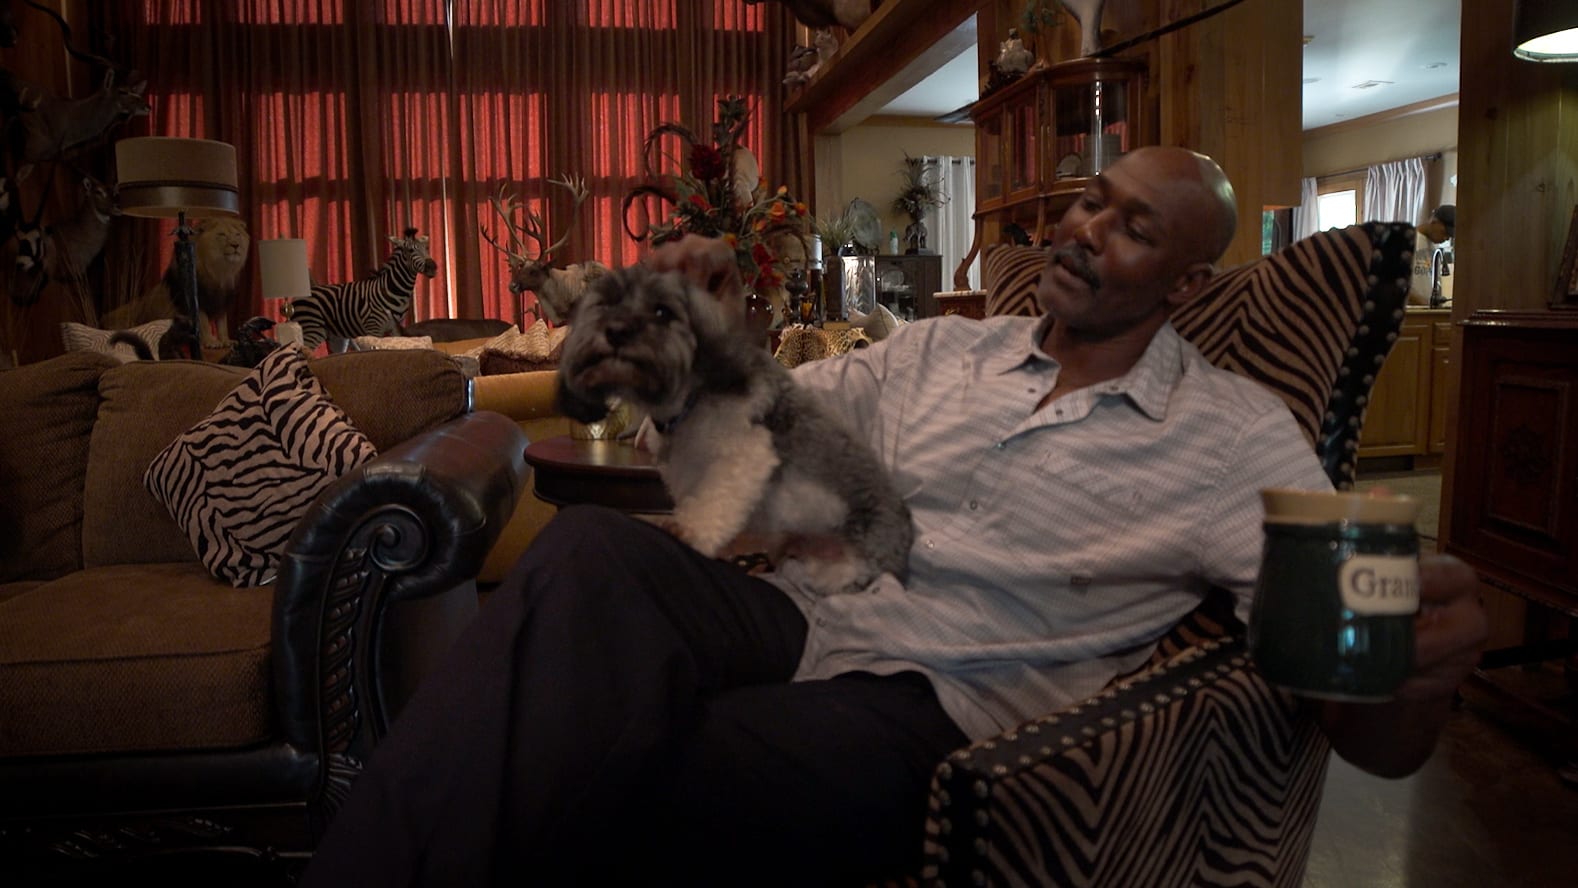 Karl Malone spends some quality time at home with his dog and his coffee. (Amir Ebrahimi)